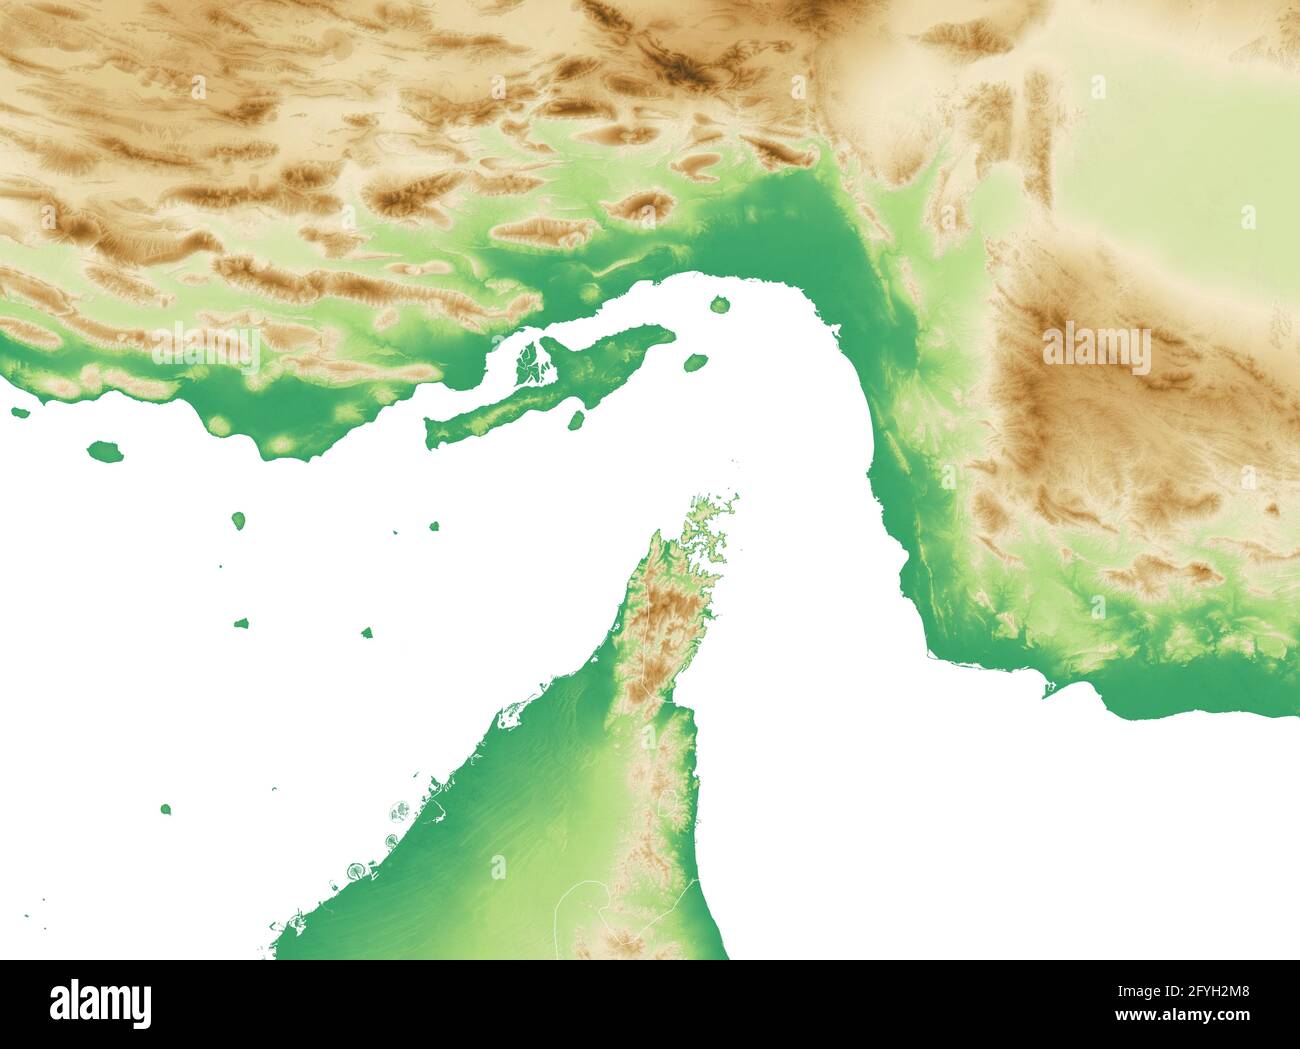 Strait of Hormuz. Map of the Middle East, Persian Gulf and Indian Ocean connecting across the Strait of Hormuz. Satellite view of Iran, UAE Stock Photo